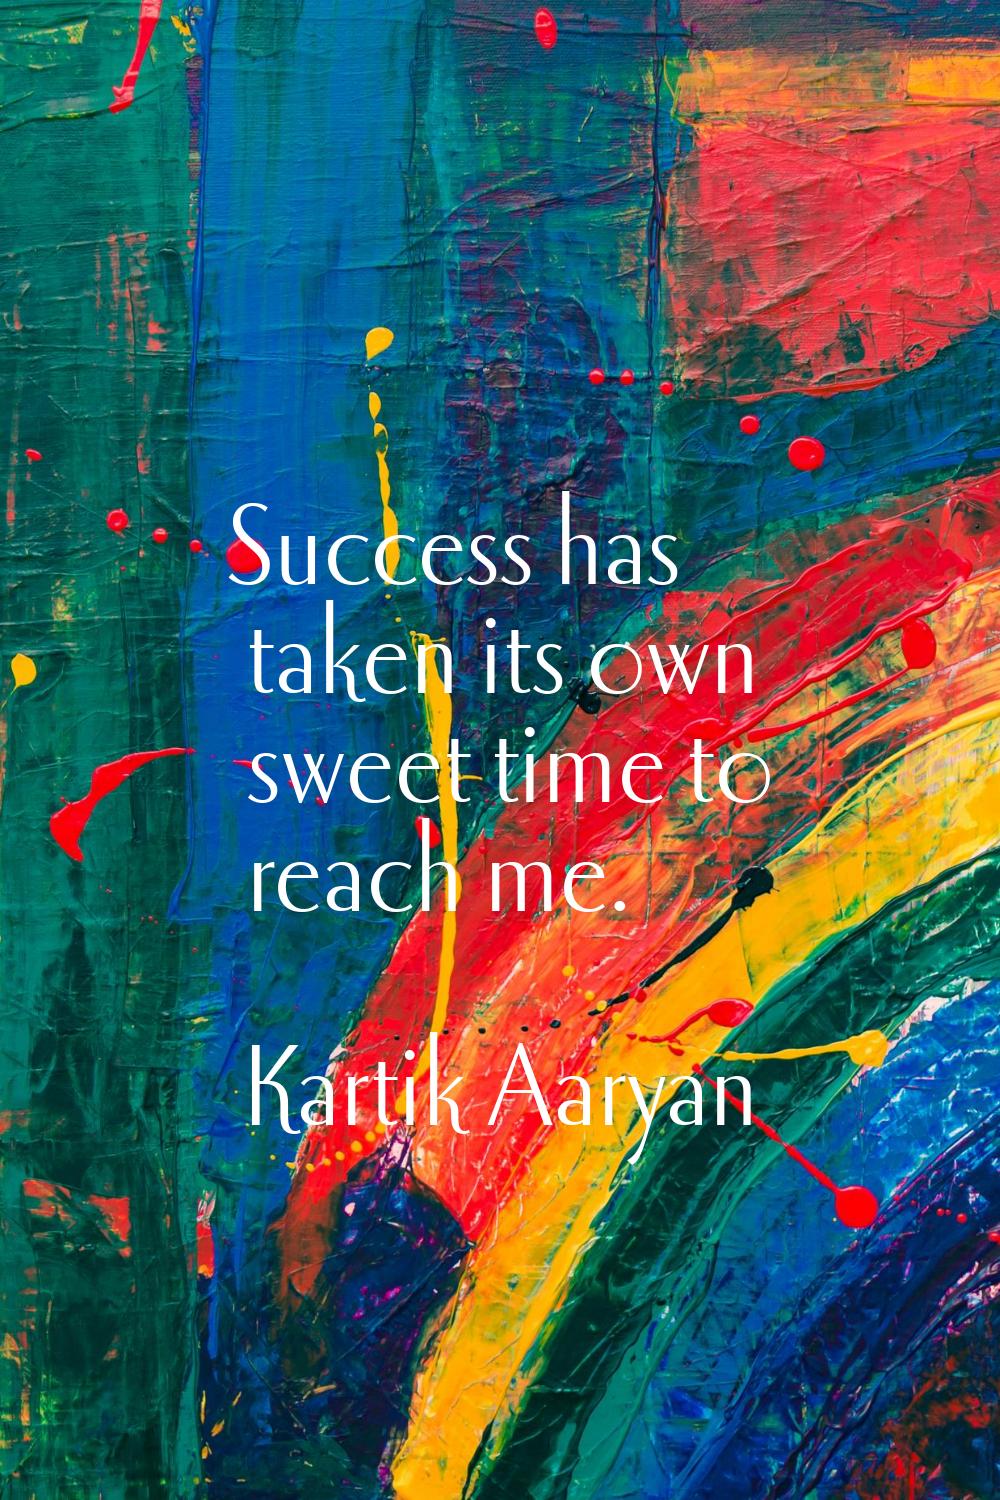 Success has taken its own sweet time to reach me.